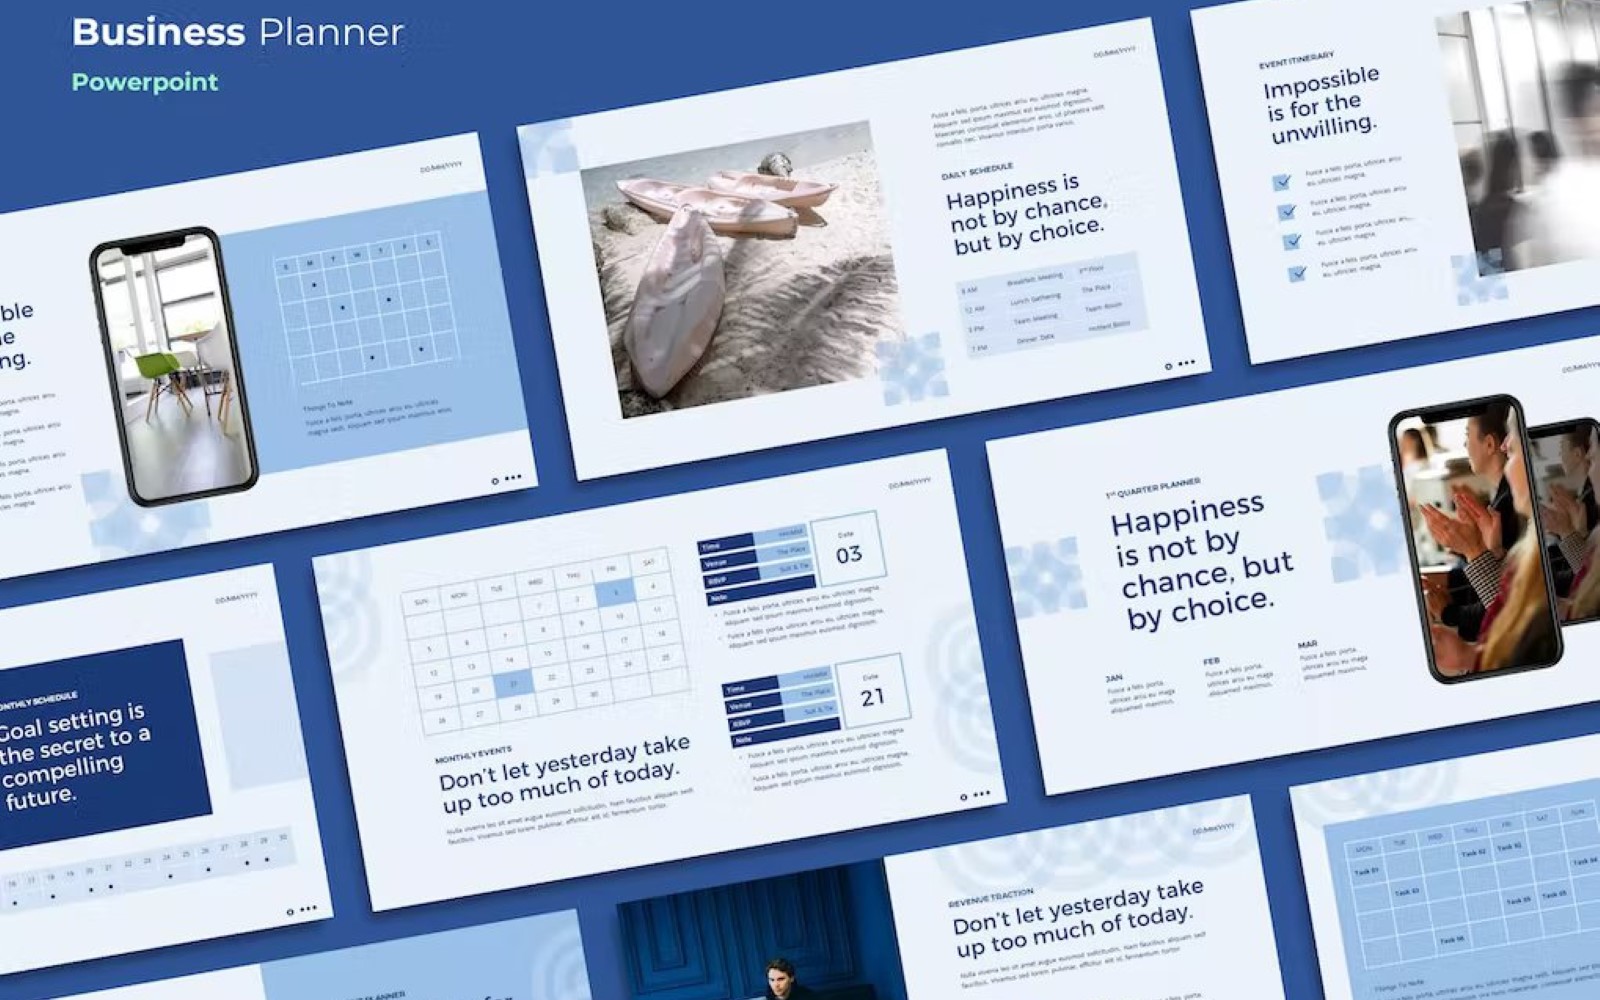 Oblake - Company Business Planner Powerpoint